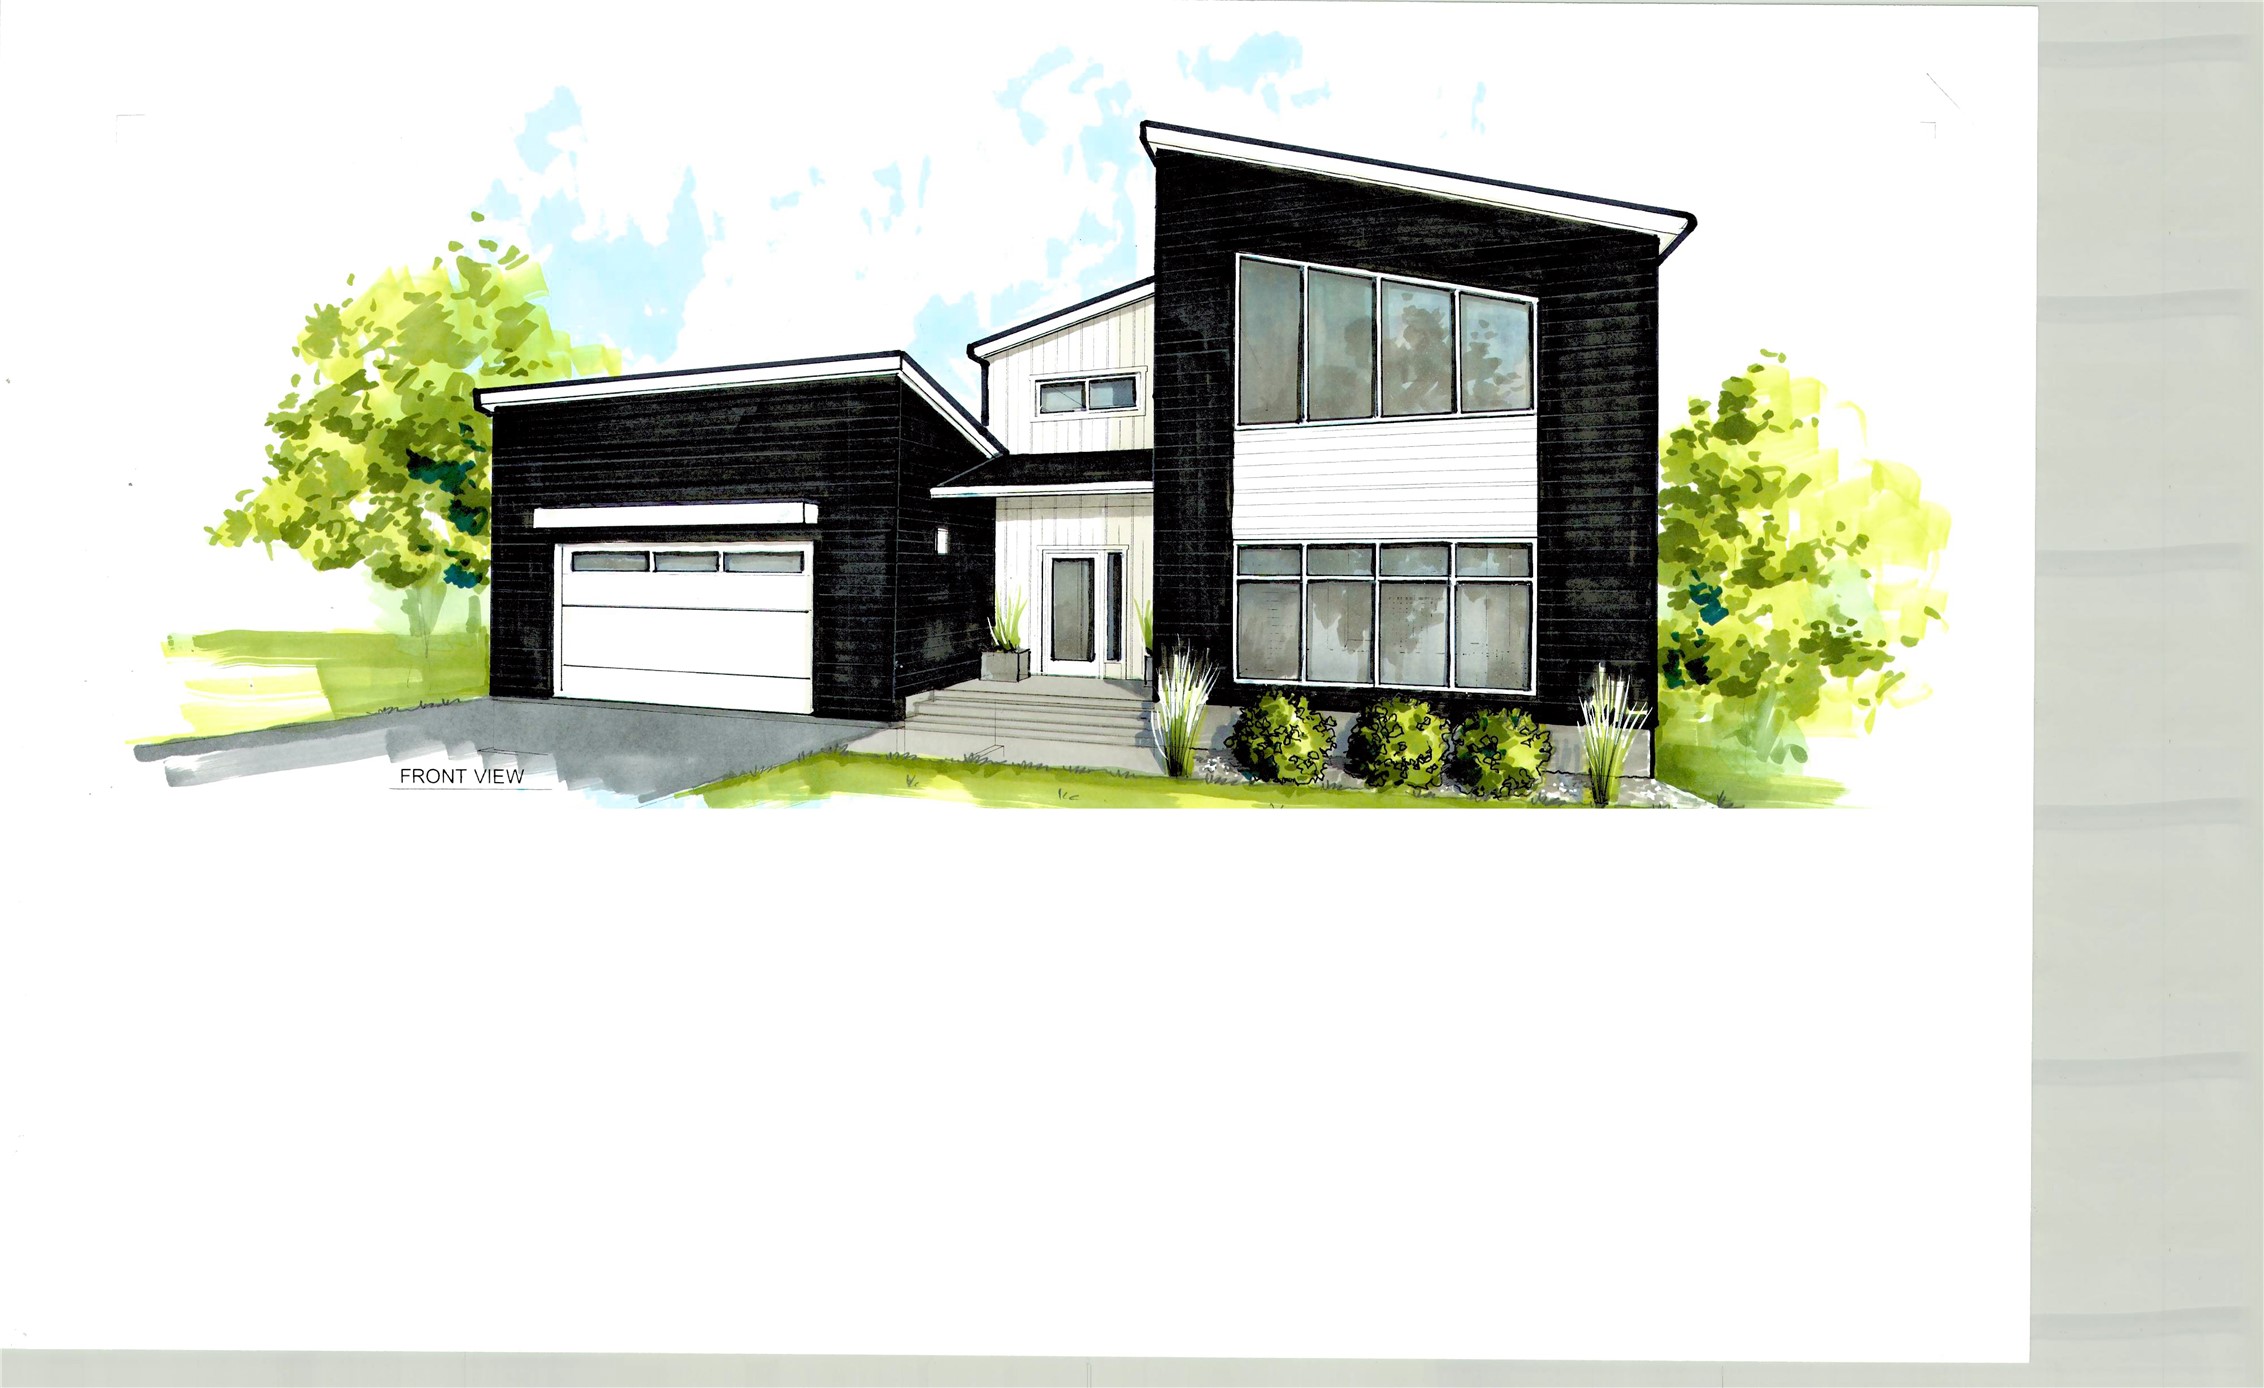 To be built mountain modern home in The Preserve Subdivision. Easy access to the bypass and only minutes from FVCC, Logan Health, and Kalispell's major shopping areas. This Orion floor plan has 2,416SF with 4 beds, 2.5 baths and attached two car garage. House has a large kitchen island, family room, & underground sprinklers. Subdivision offers walking trails, dog park, and play ground all within close distance to the home. Contact Cecil Waatti 406.890.4000 Layne Massie 406.270.6664 or your real estate professional.